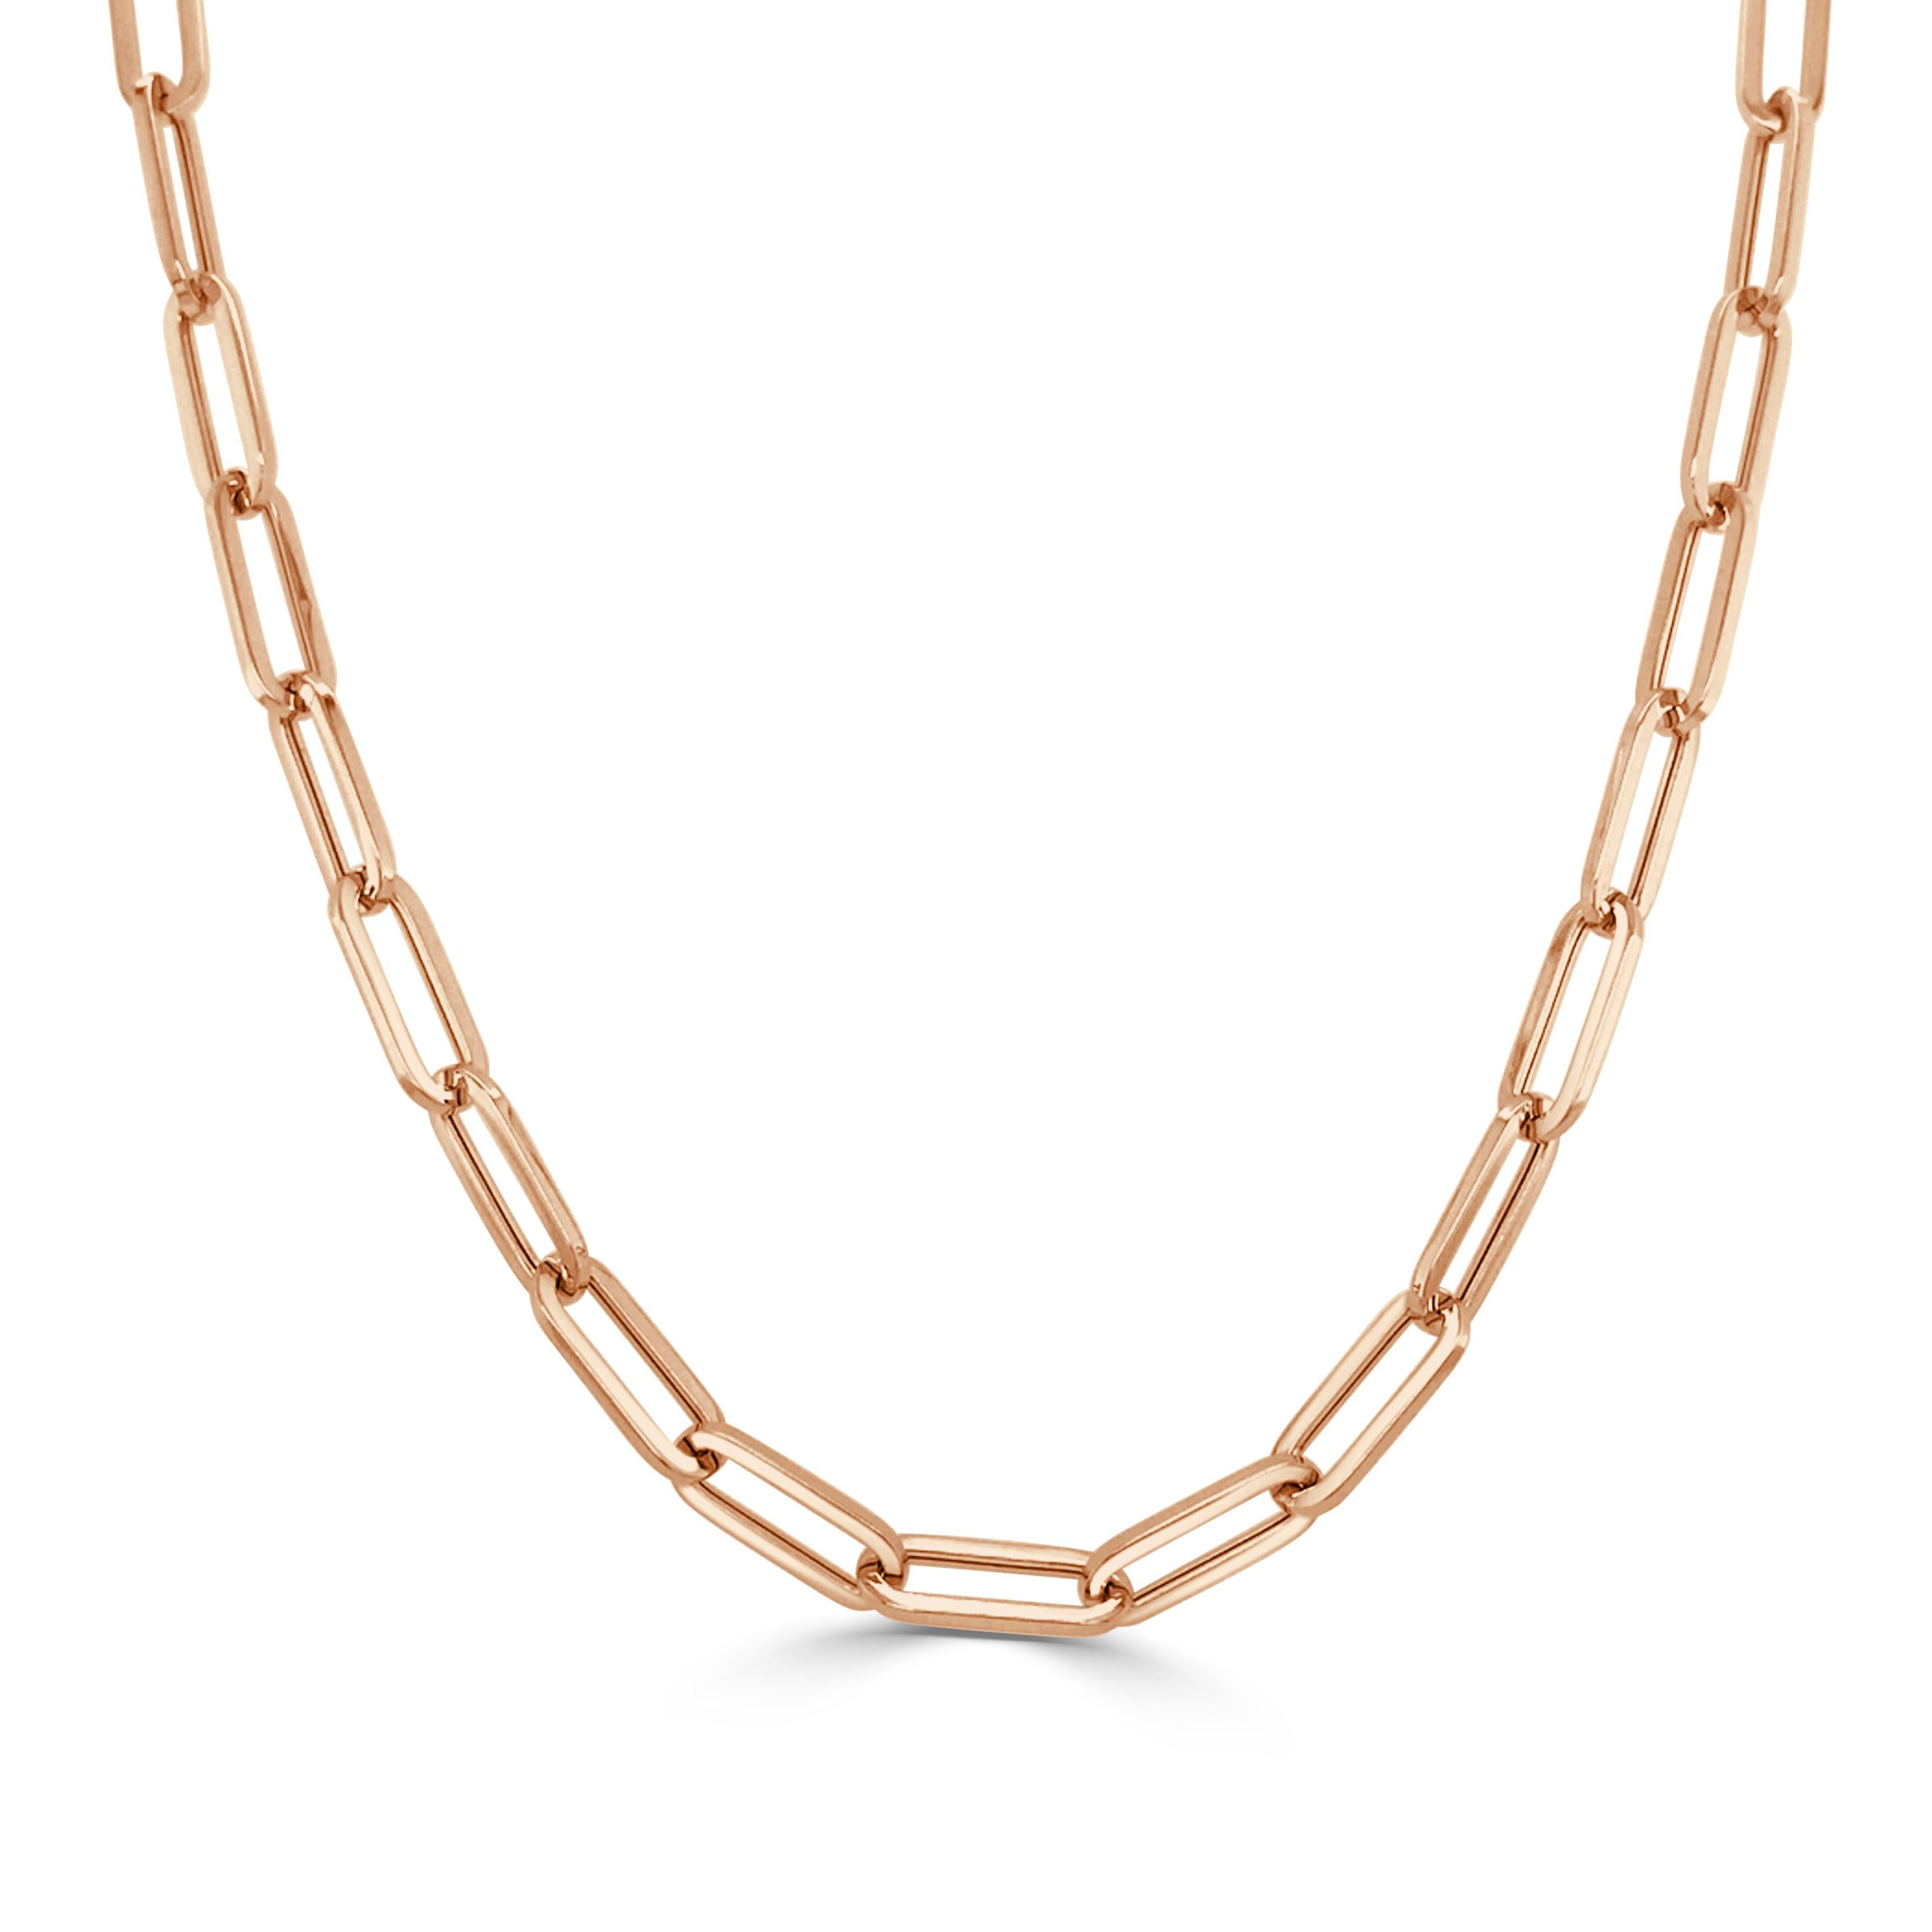 Quality Italian Design Necklace: Made and designed in Italy where craftsmen are known for their attention to design and detail, this Necklace boasts a chic 14k yellow or rose gold link 18